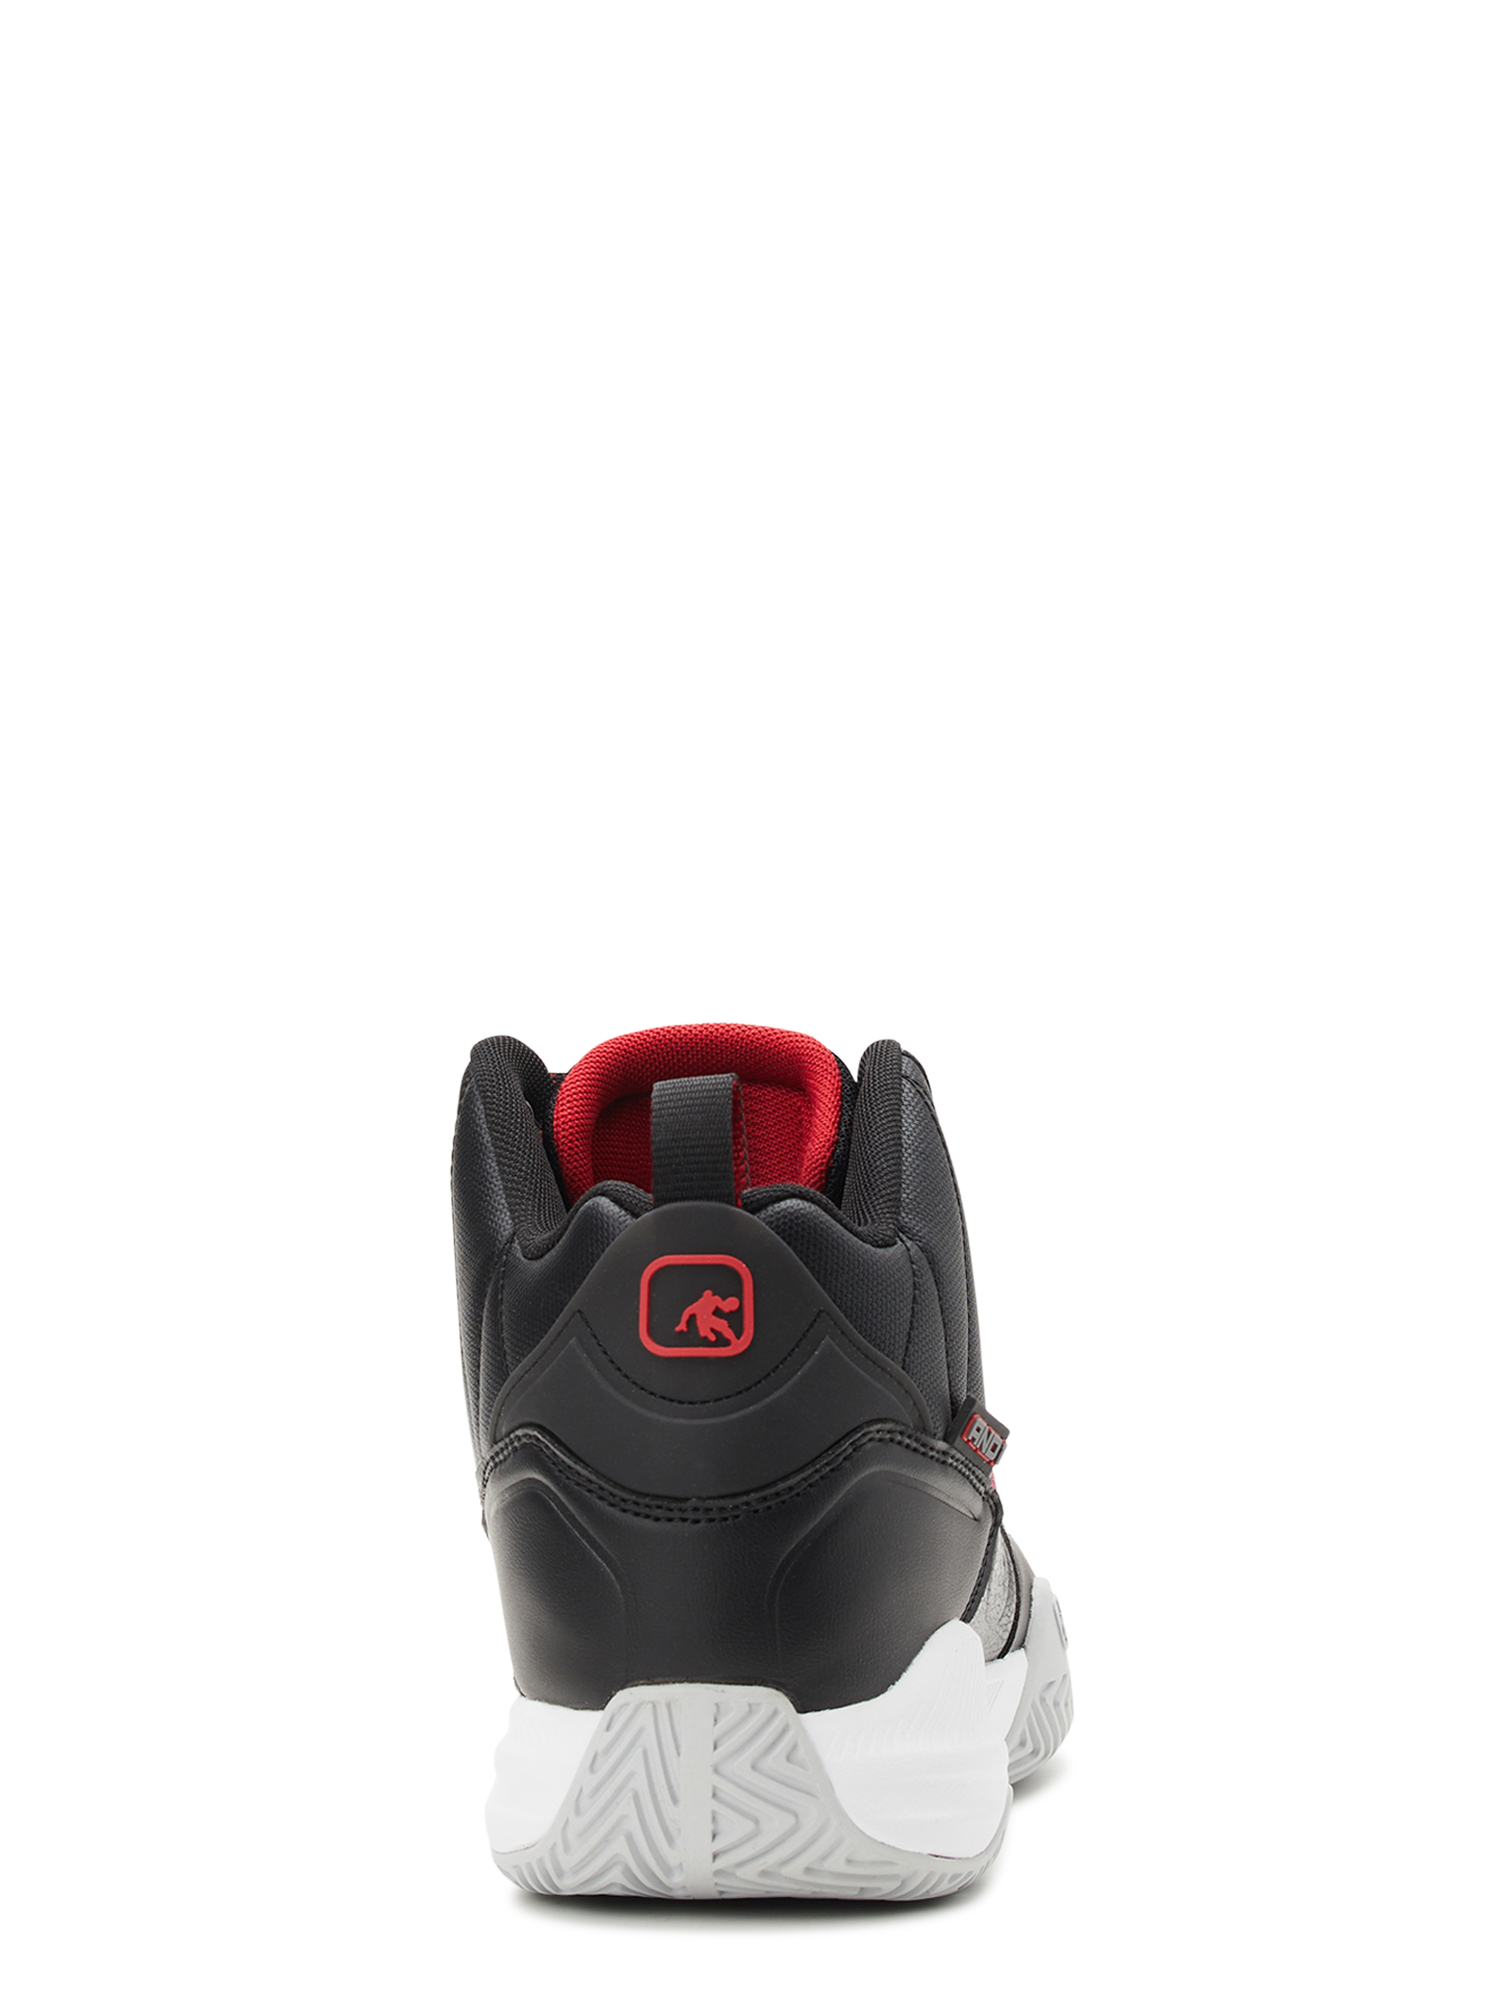 AND1 Men’s Streetball Basketball High-Top Sneakers - image 3 of 6